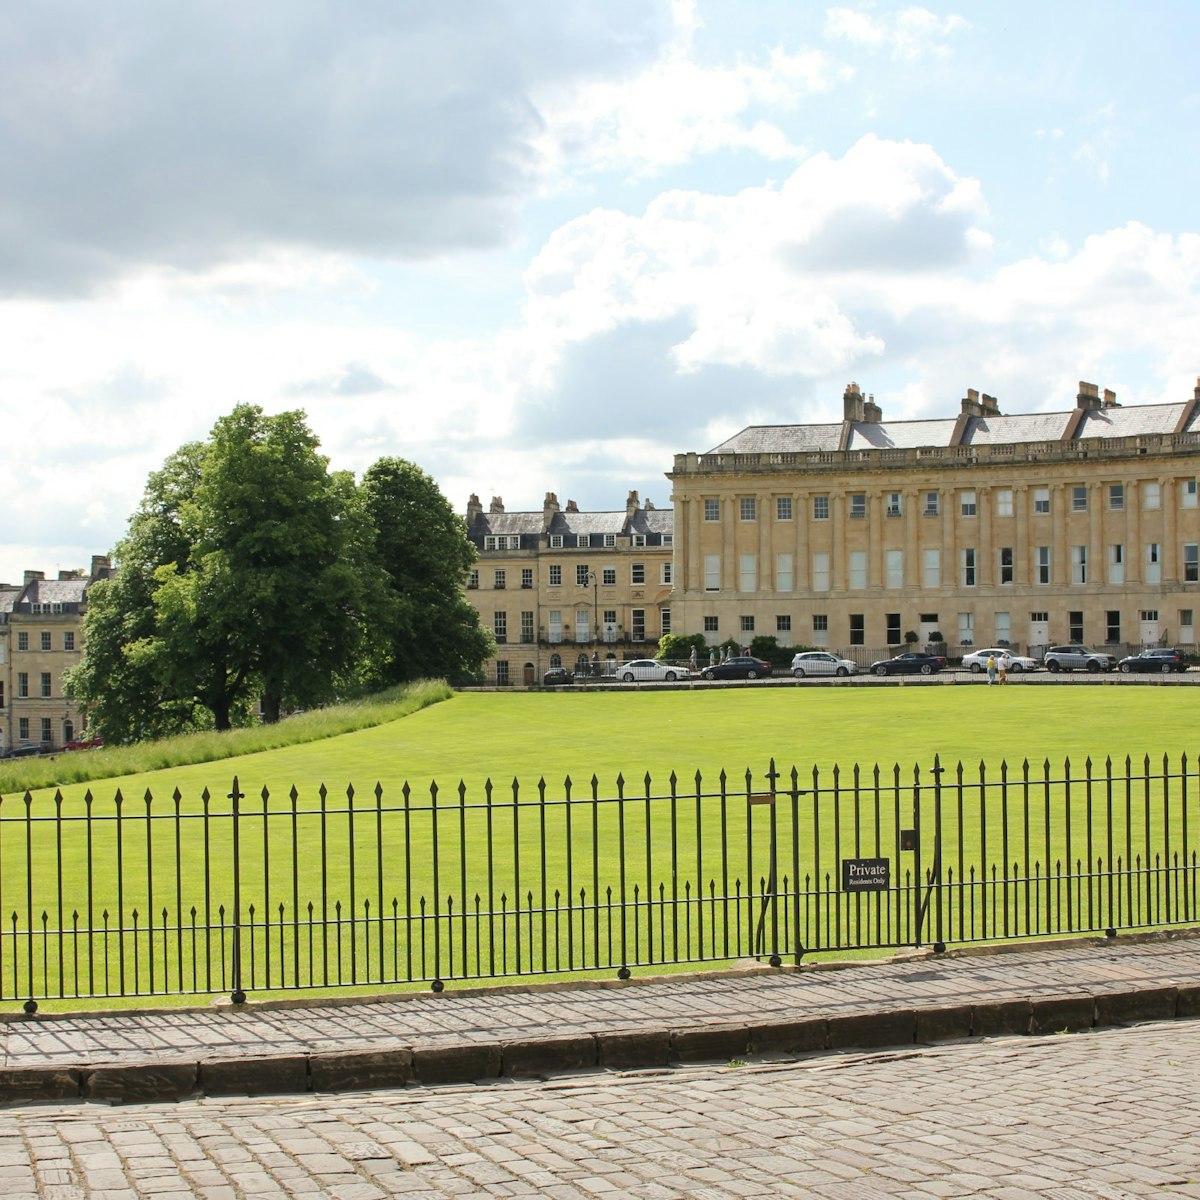 The view from No 1 Royal Crescent